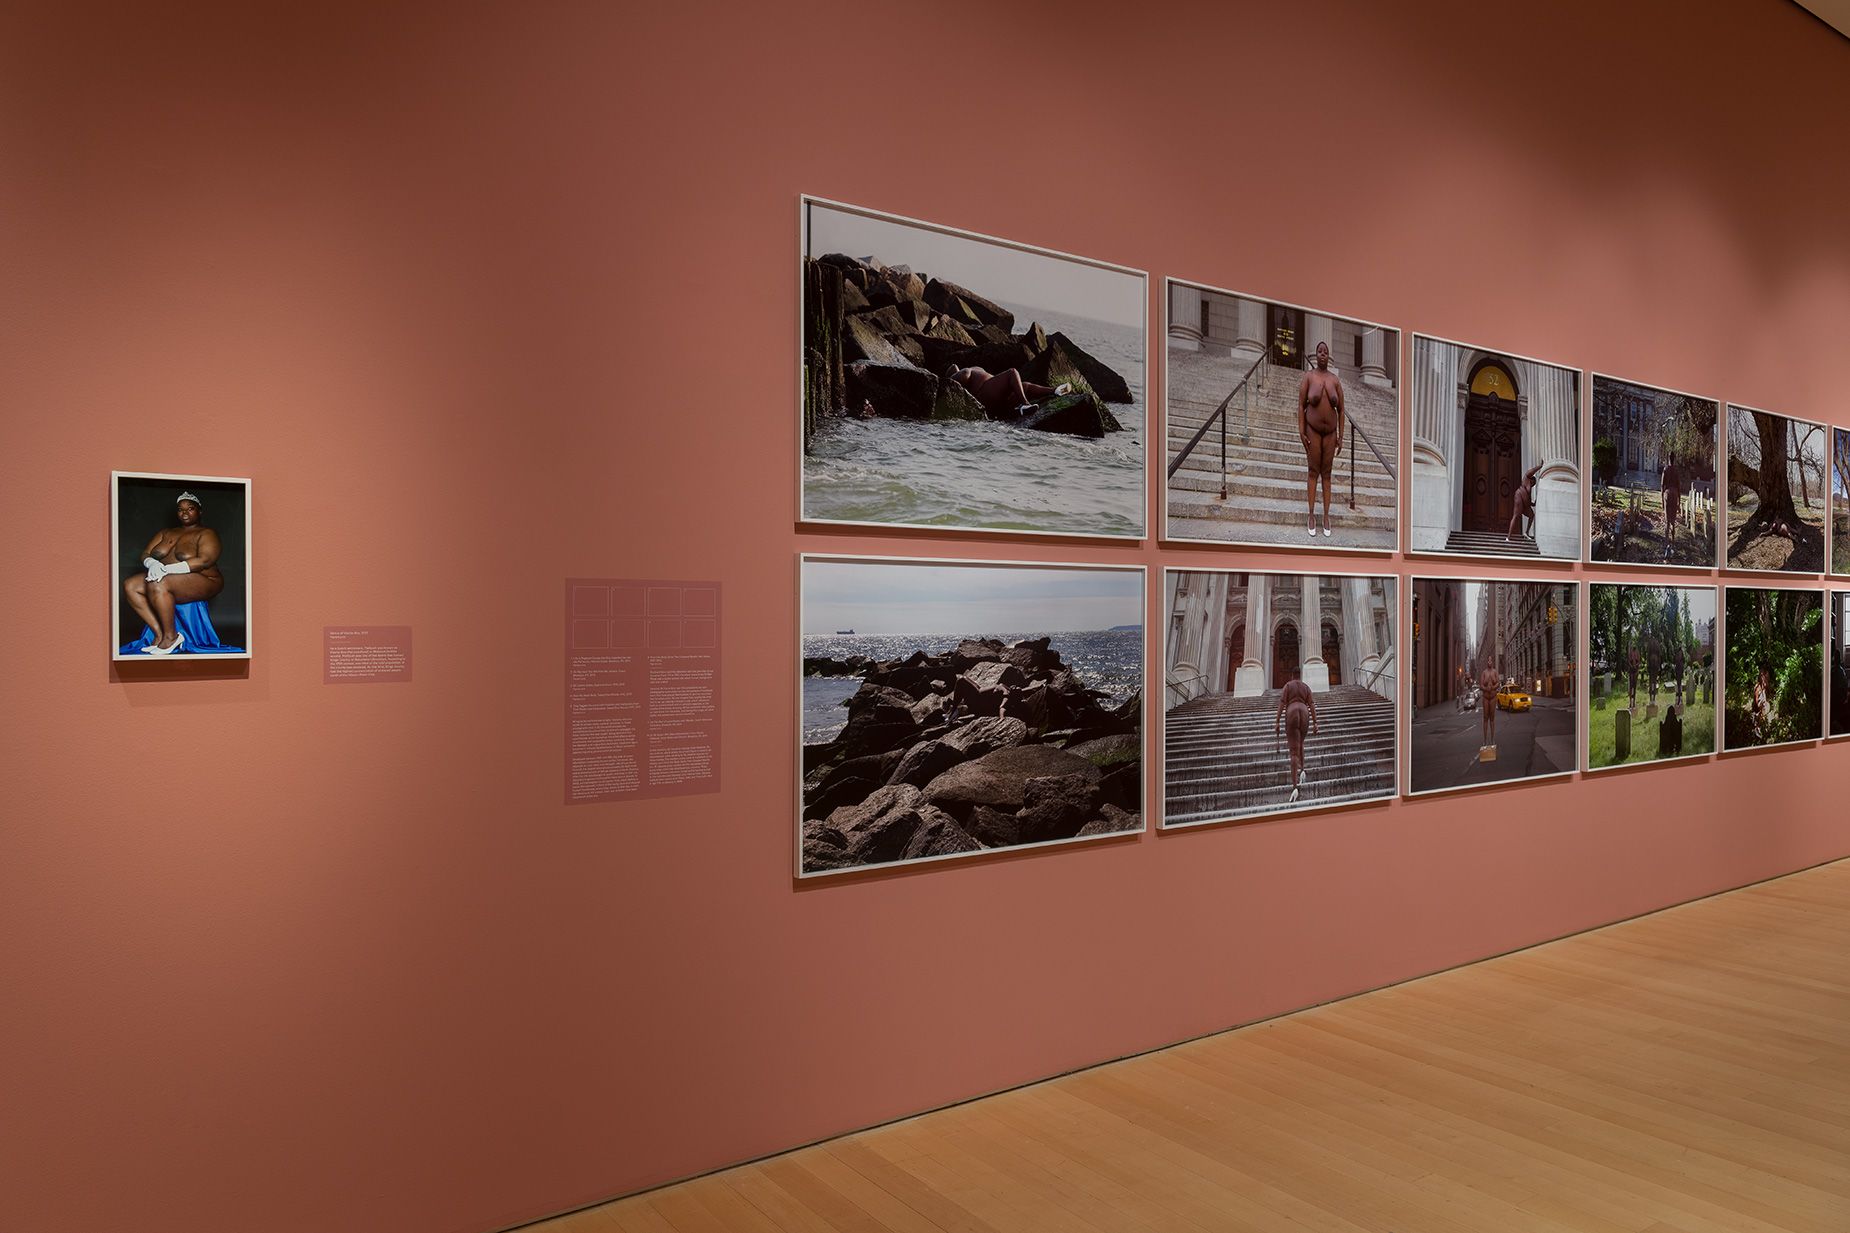 Faustine's "White Shoes" exhibition at the Brooklyn Museum opens with her 2012 shot "Venus of Vlacke Bos," (far left).